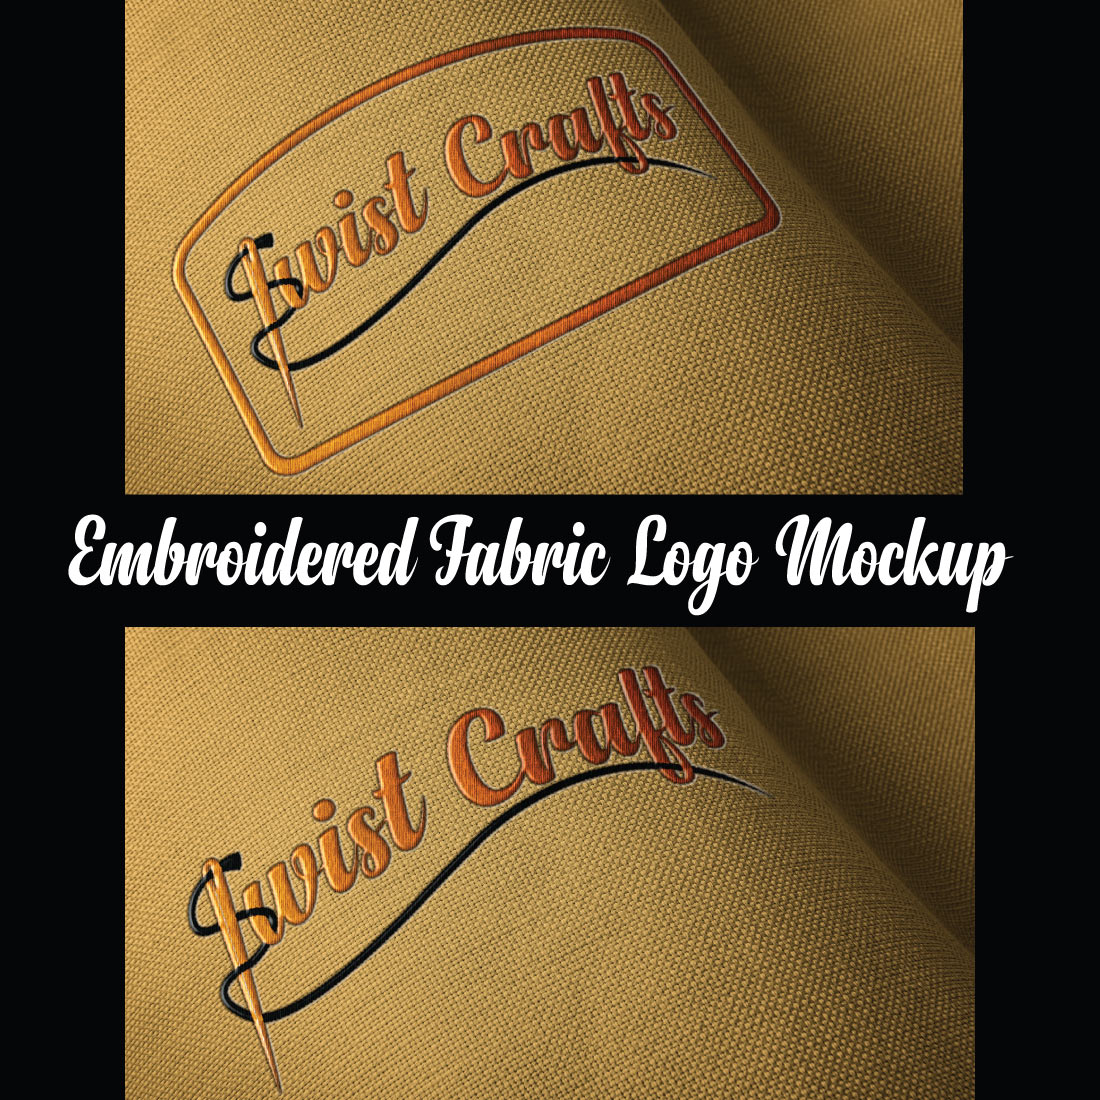 Embroidered Fabric Logo Mockup PSD file cover image.